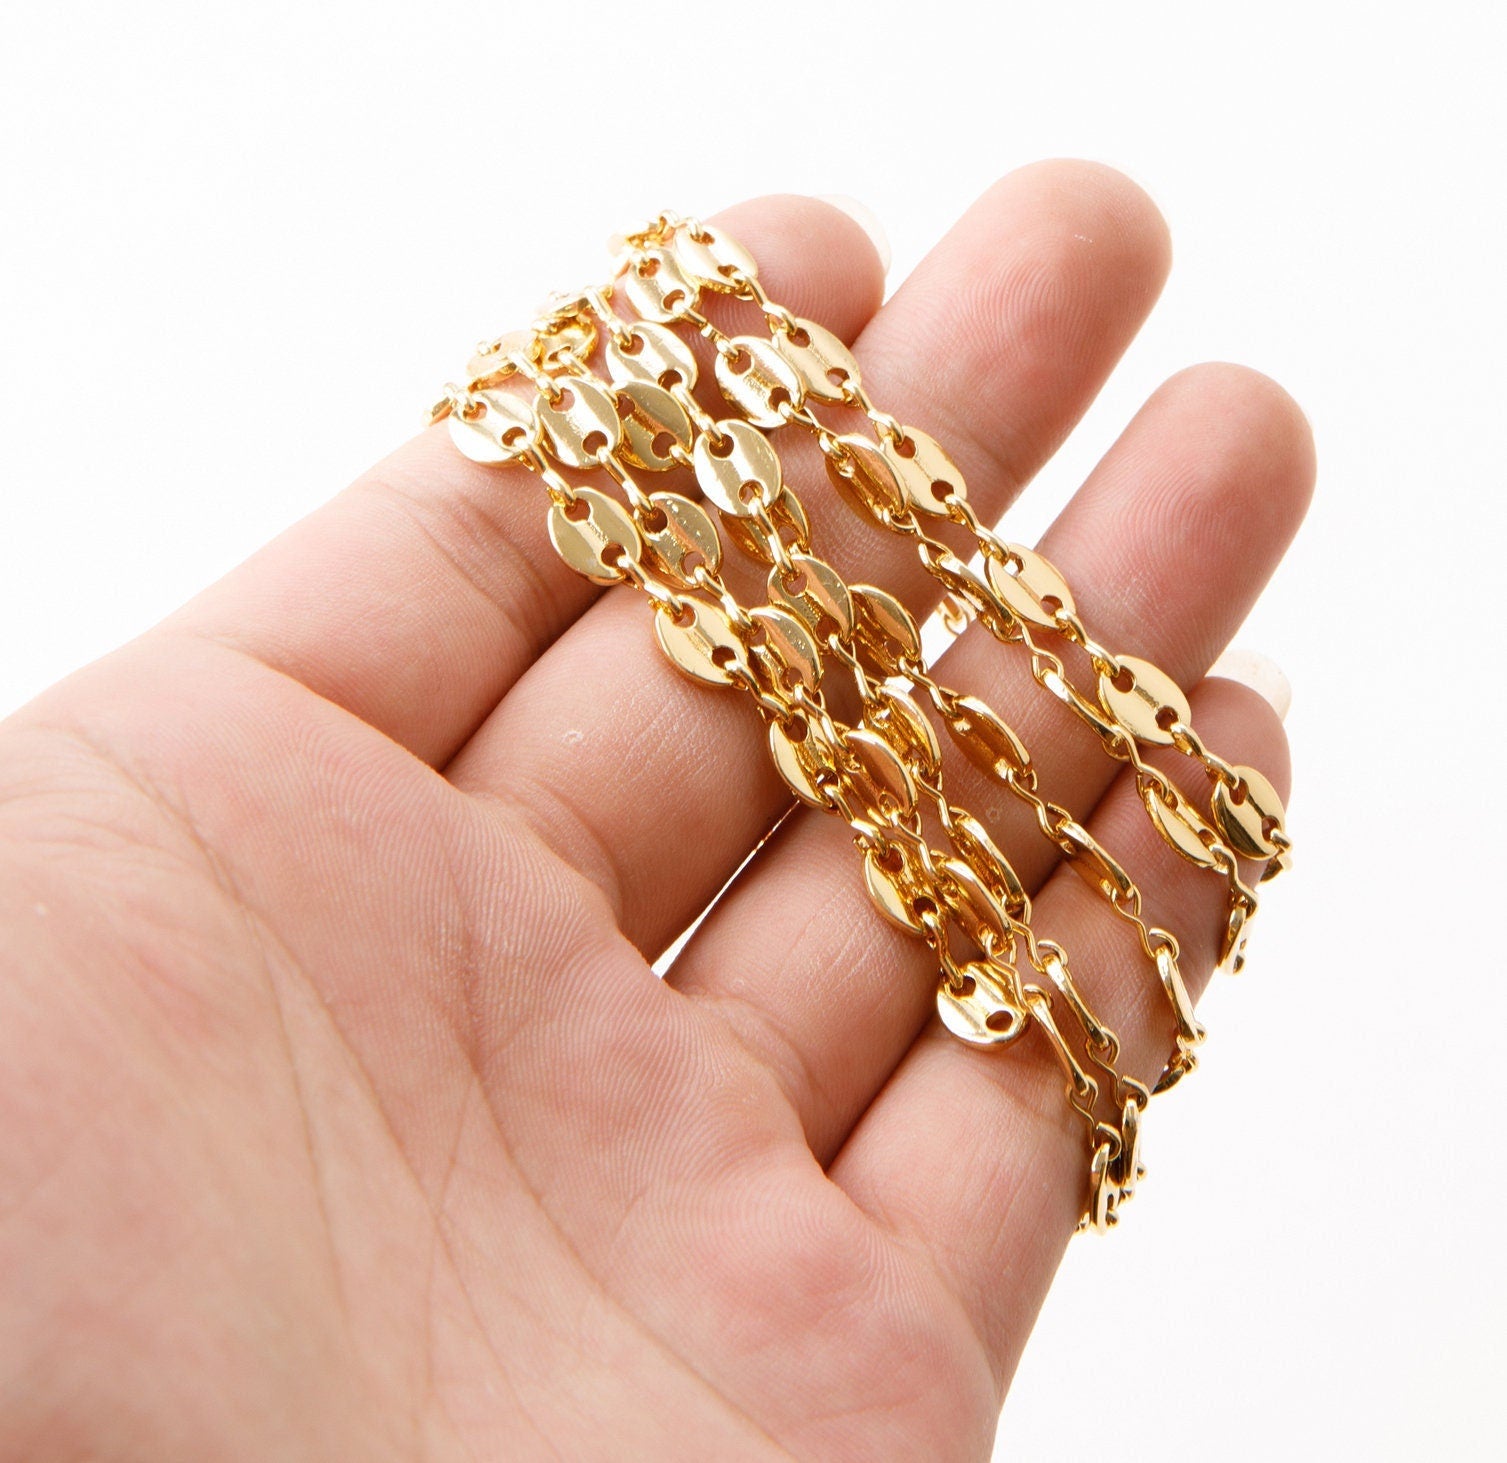 18k Gold Plated Chain Jewelry Making